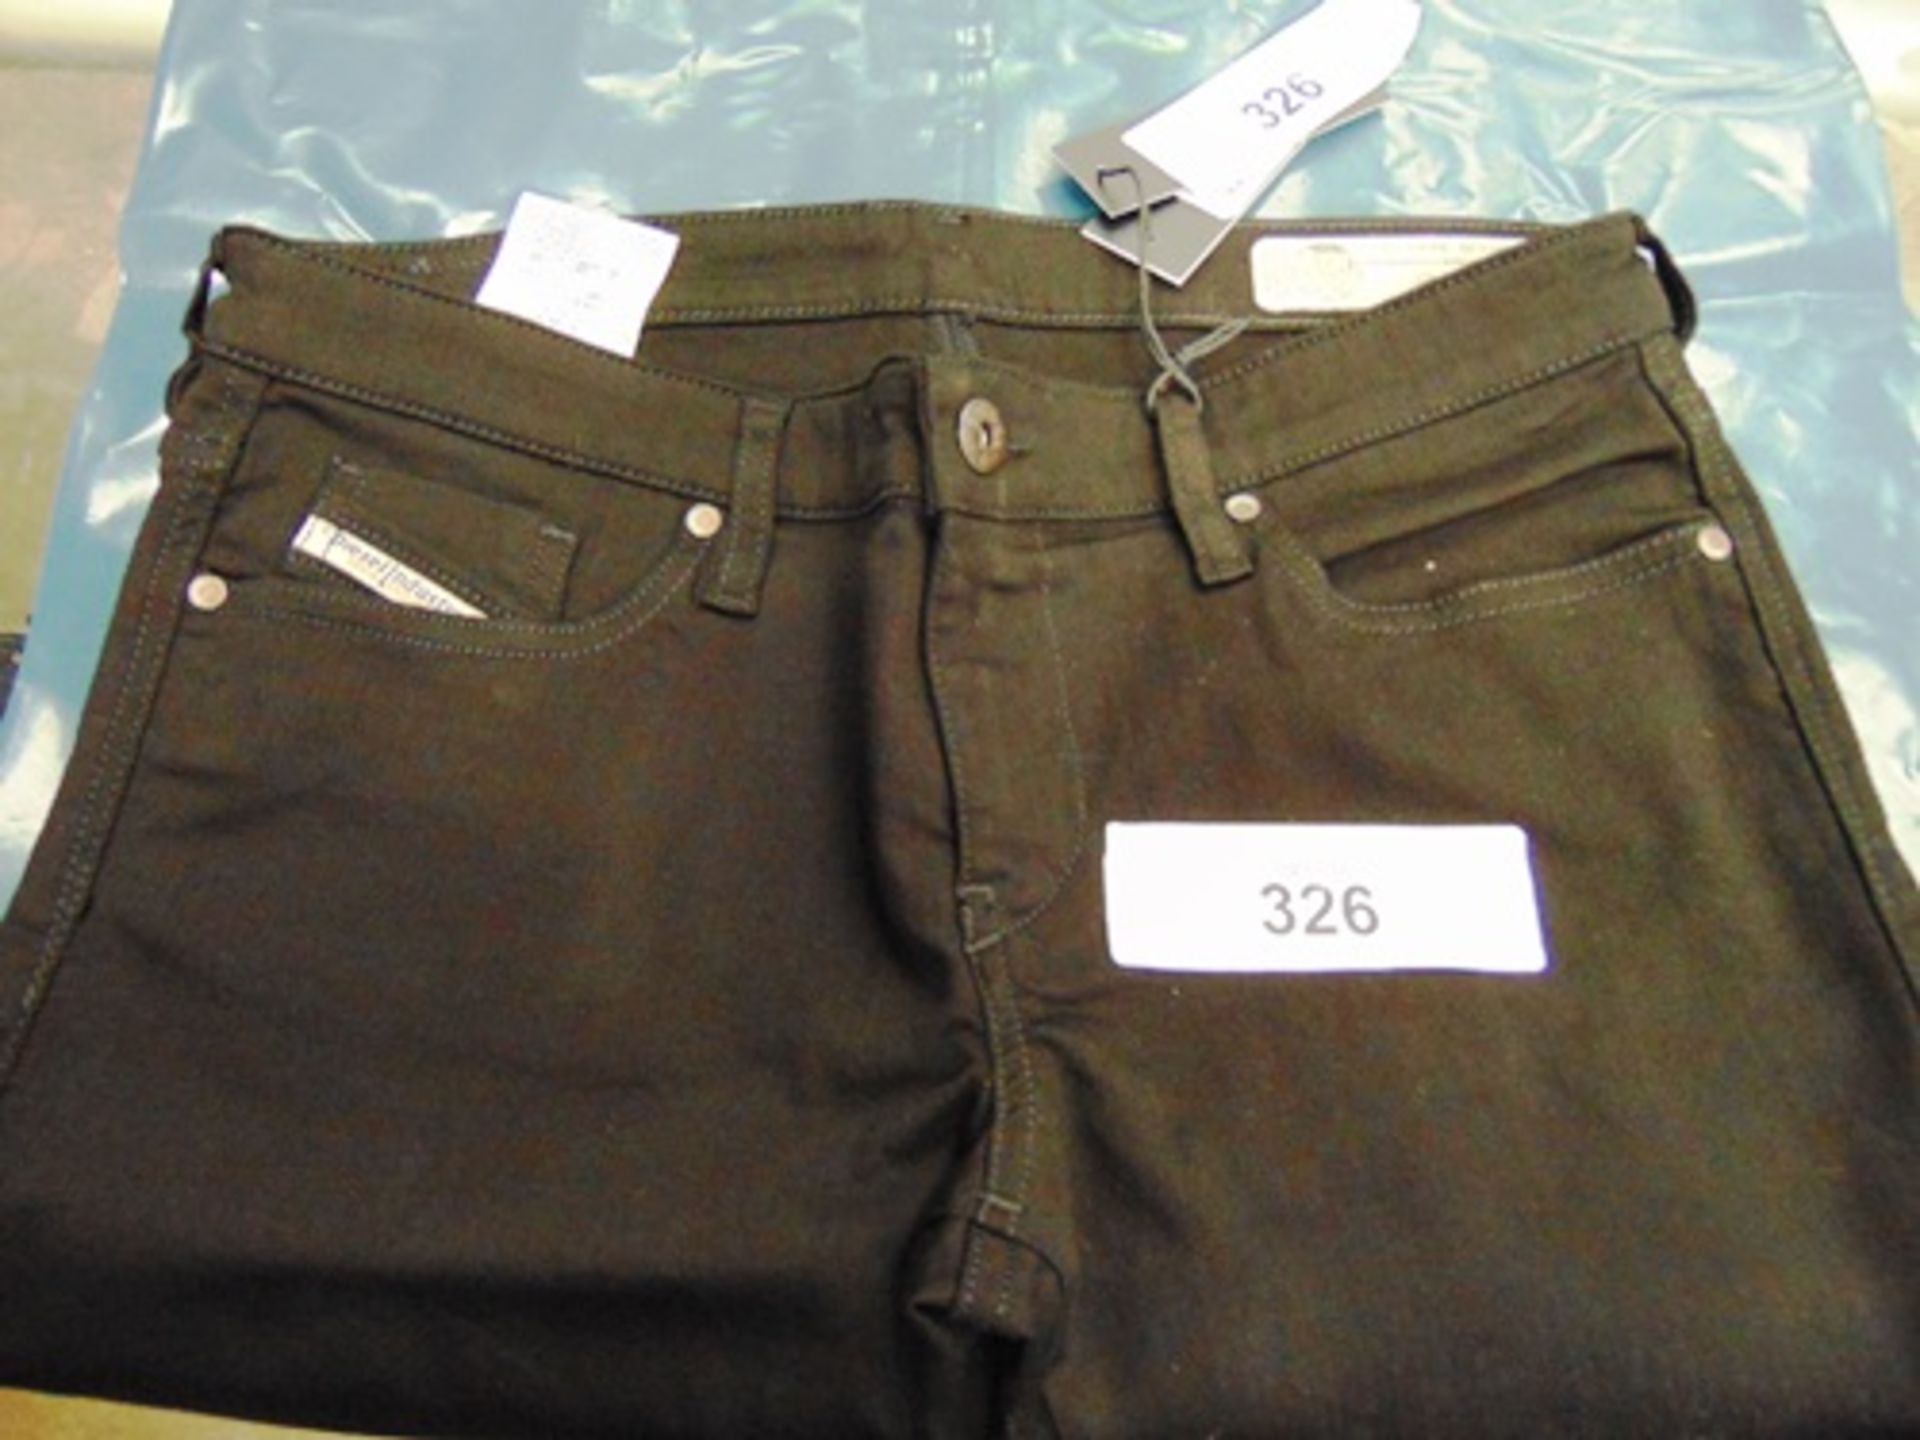 1 x pair of Diesel skinzee, low, L.32 trousers, size 30, length 30, RRP £80 - New with tags (CC1)